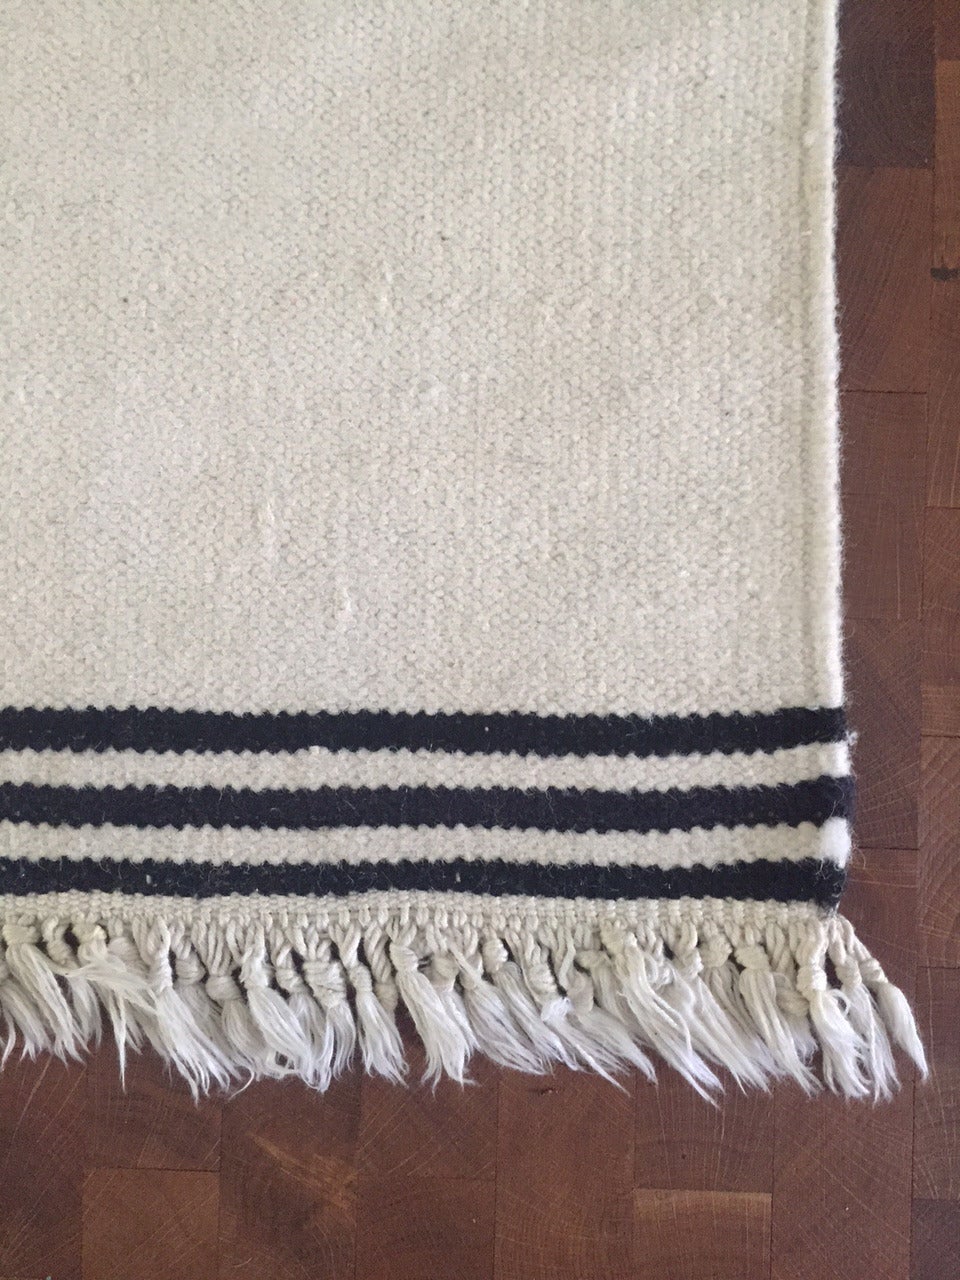 A rare flat-woven carpet by Vibeke Klint in natural snow white colored wool and black stripes. Double-sided and made by hand by Vibeke Klint in Denmark, early 1960s.